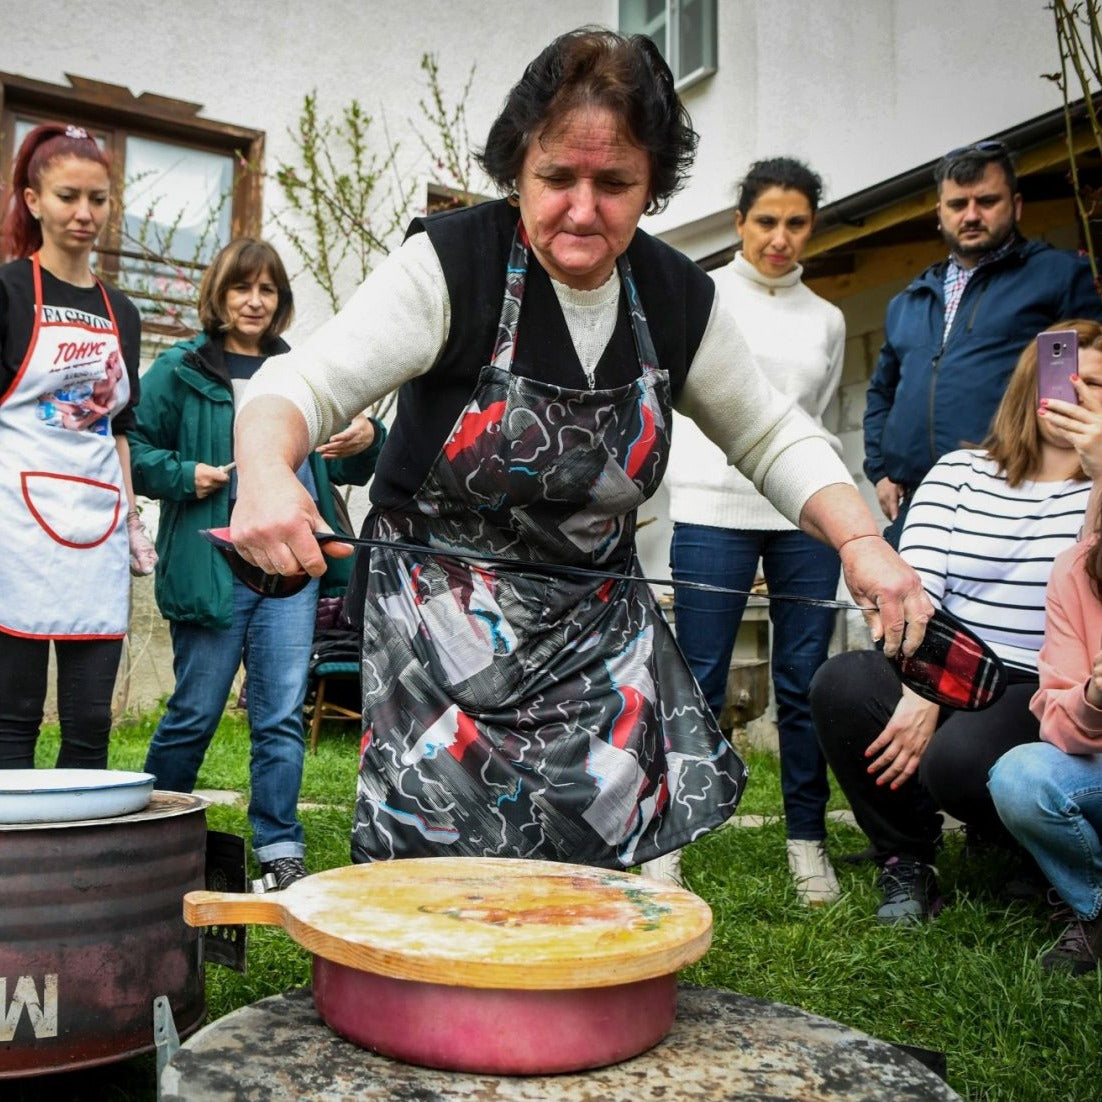 Rhodope rice klin culinary workshop and overnight stay for two